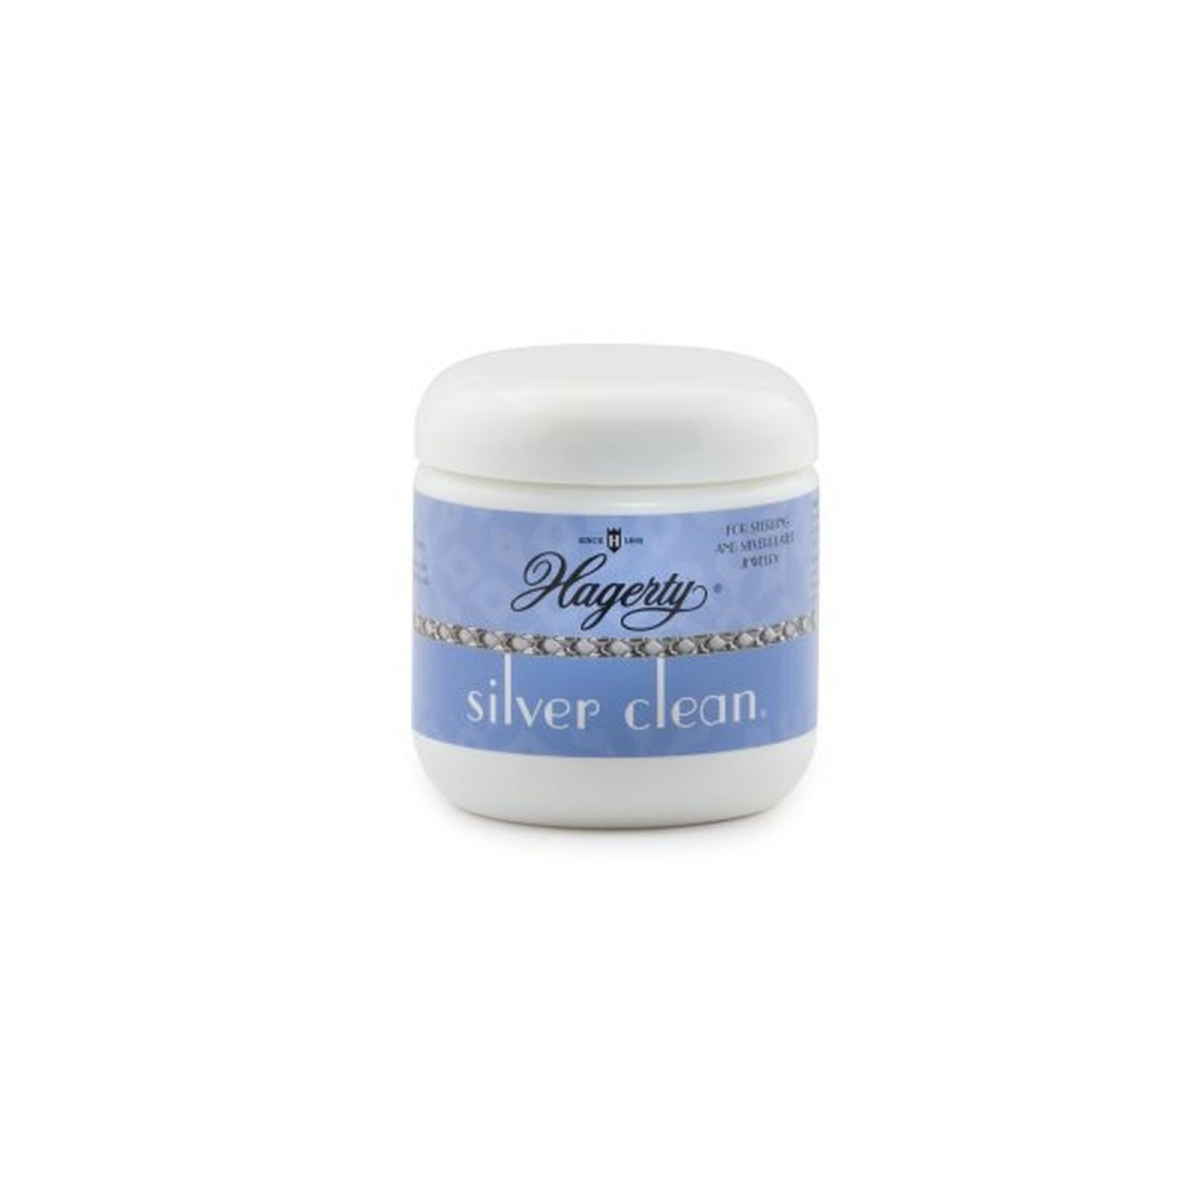 Goddards Dip Foam Jewellery Care and Silver Cloth and Polish